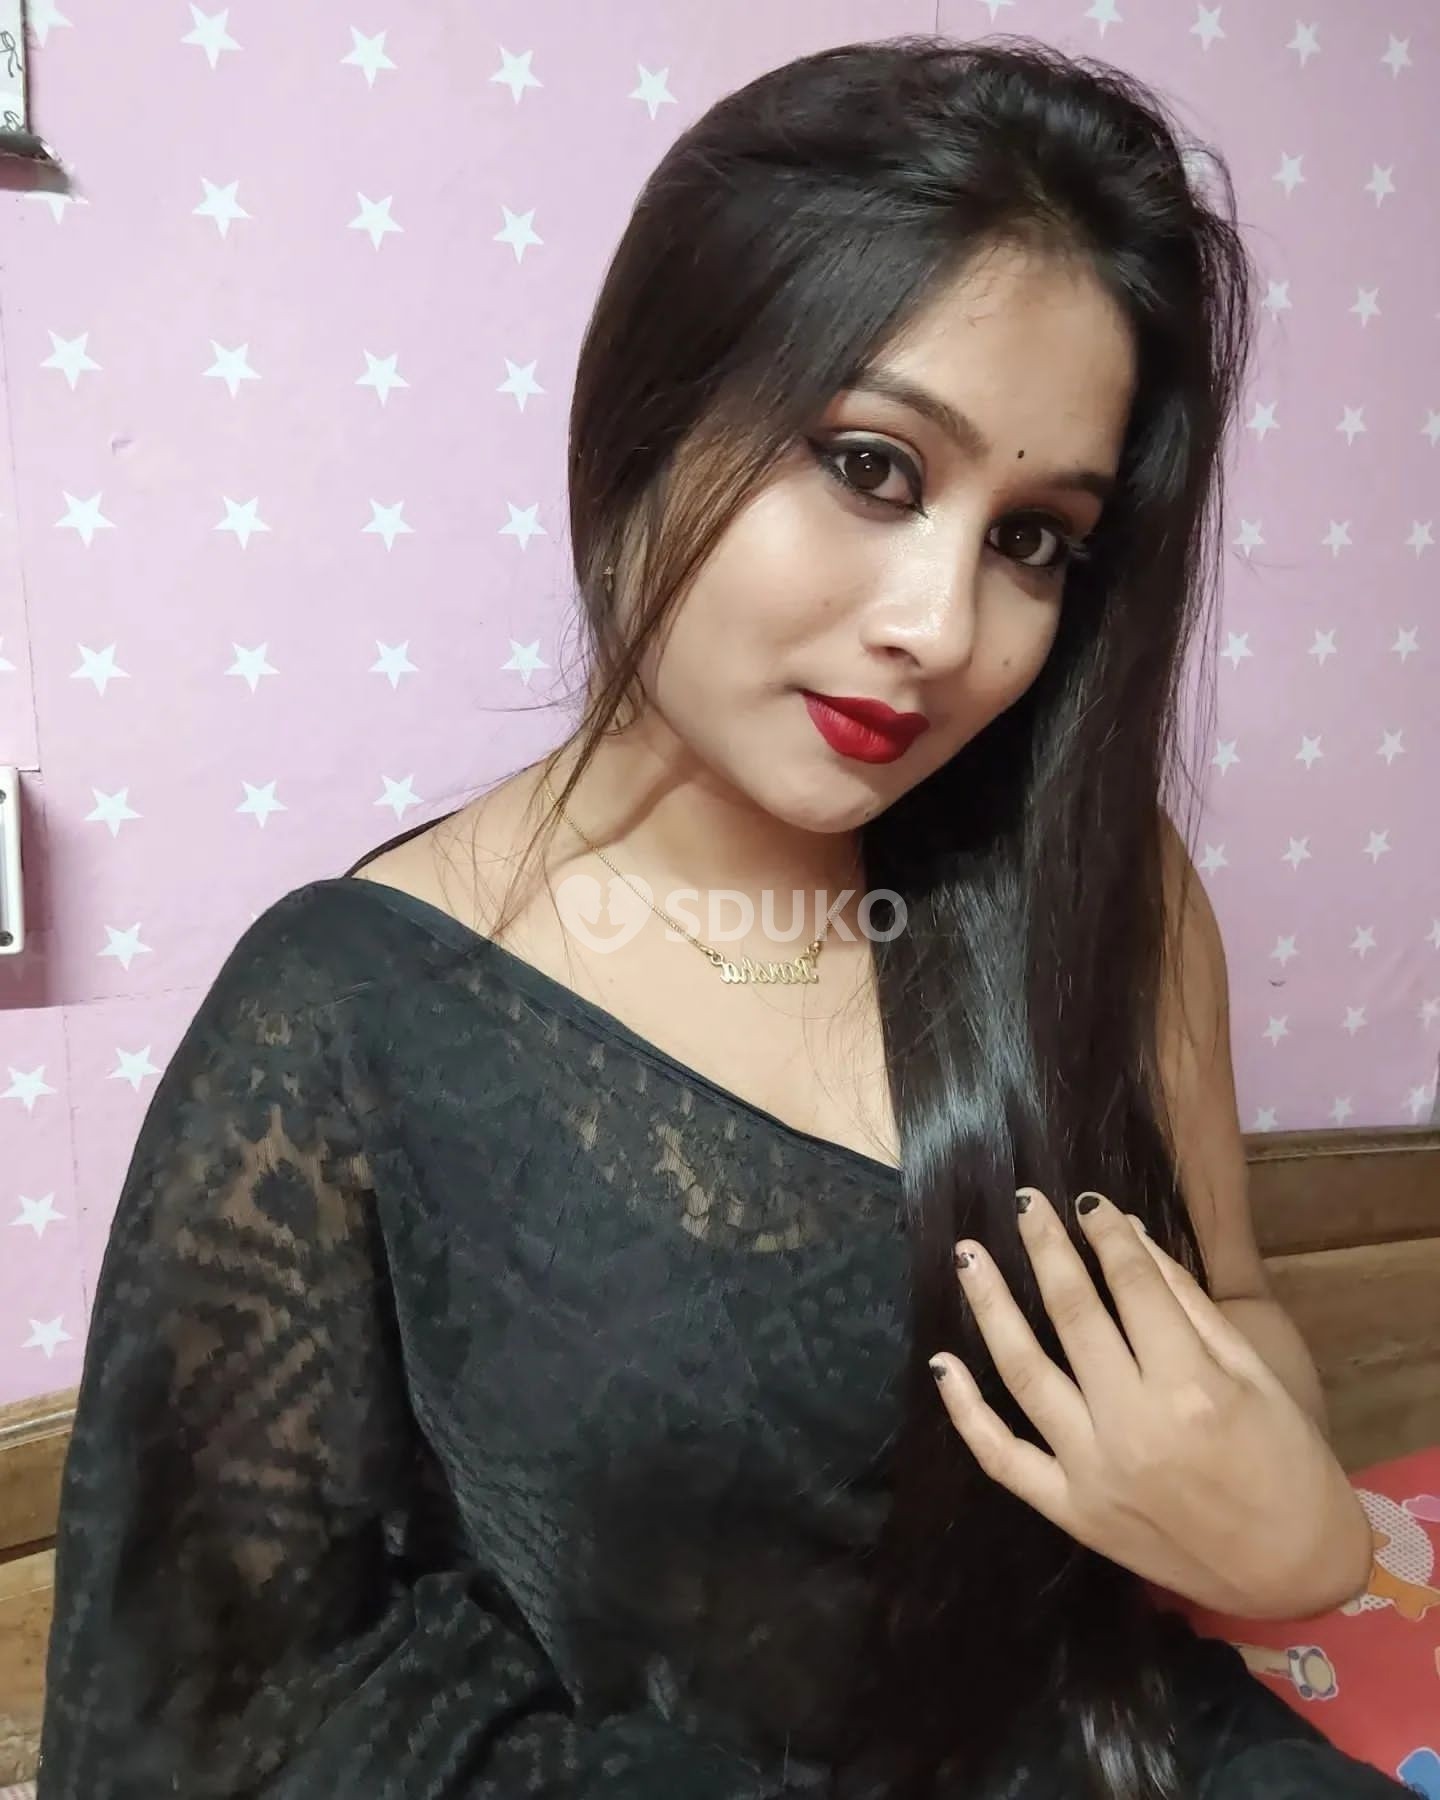 BHILAI 🆑 TODAY LOW PRICE 100% SAFE AND SECURE GENUINE CALL GIRL AFFORDABLE PRICE CALL NOW 24/7 AVAILABLE ANYTIME CALL